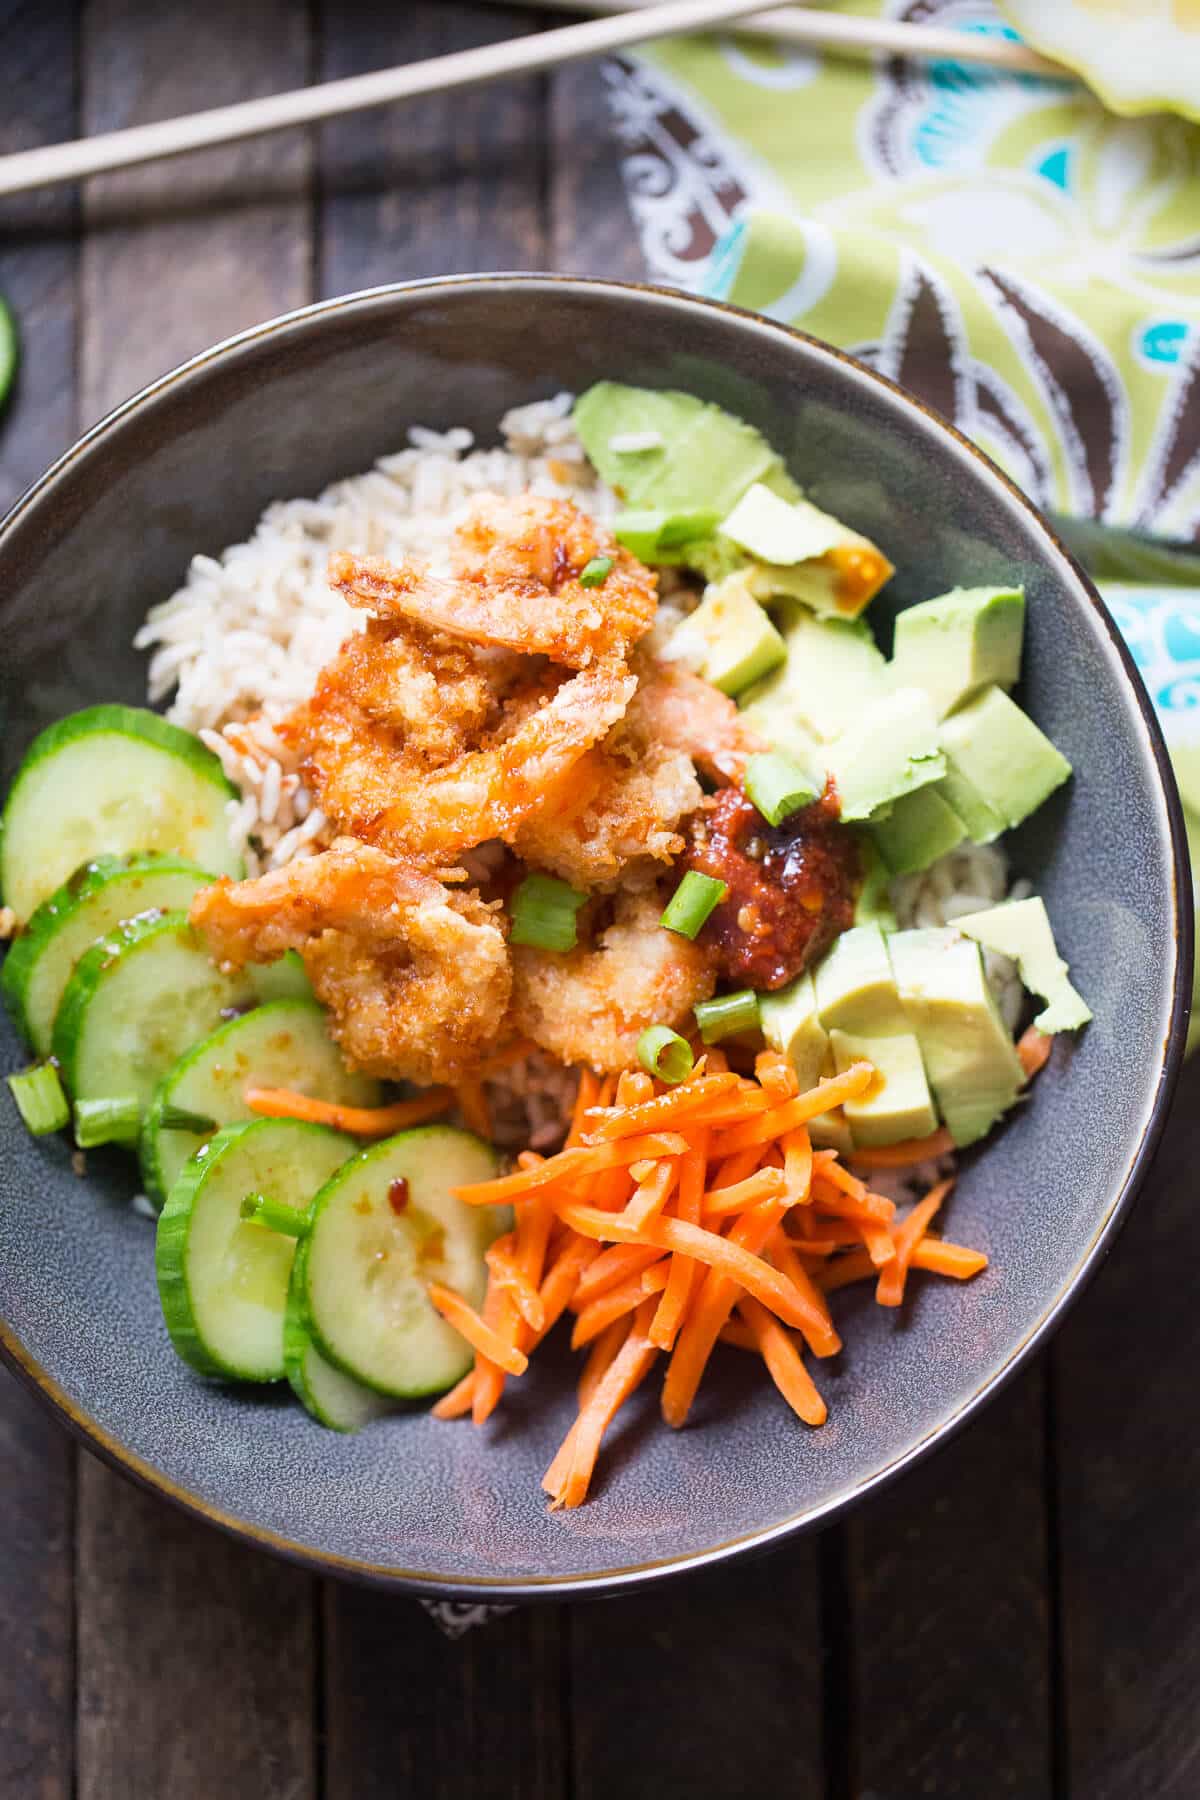 Breaded shrimp give texture and crunch to this simple sushi bowl!